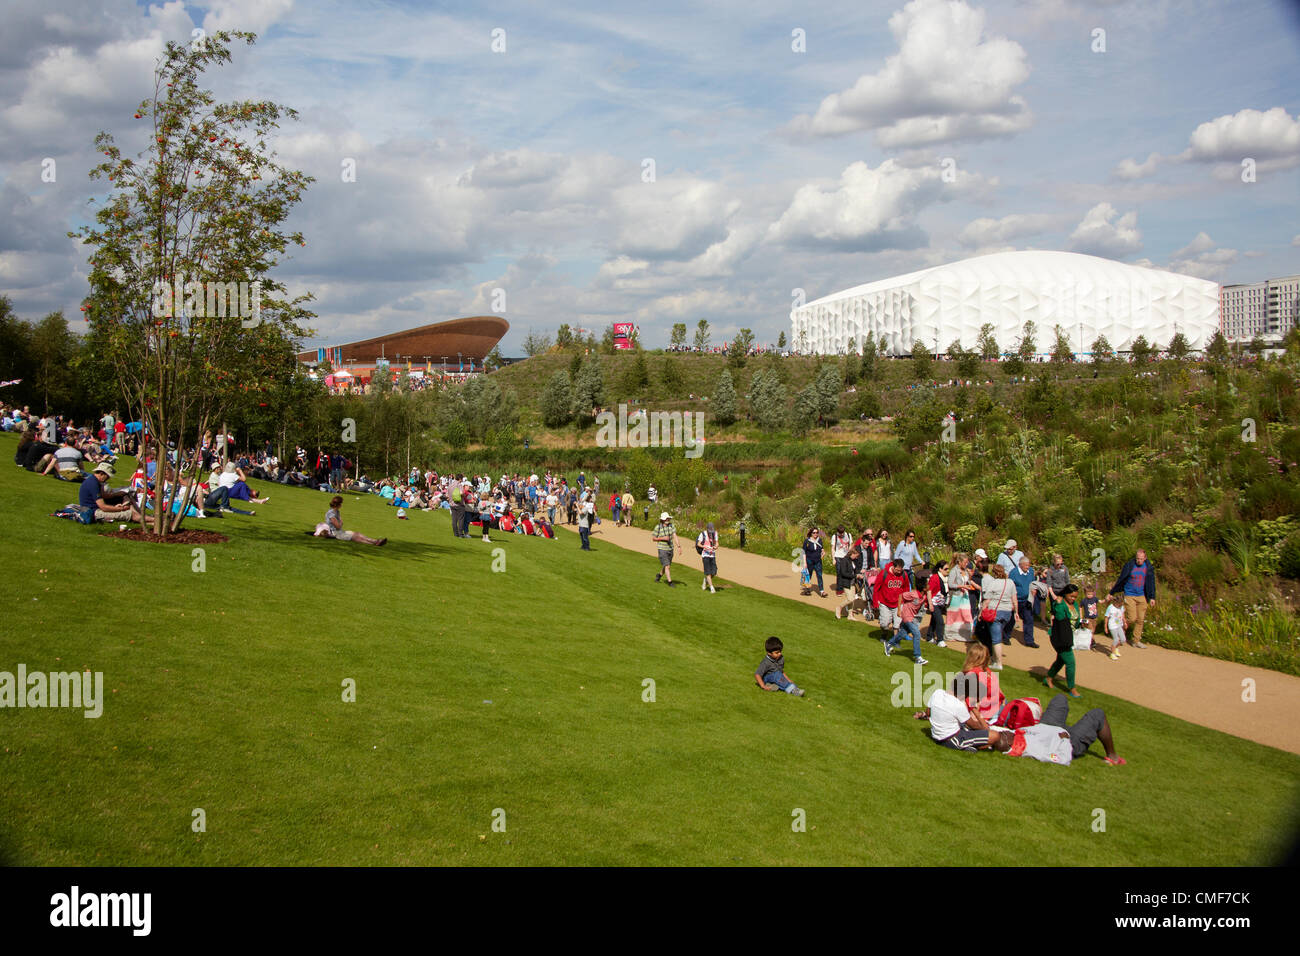 People sitting on lawns in sunshine on a sunny day with Velodrome and Basketball Arena at Olympic Park, London 2012 Olympic Games site, Stratford London E20 UK, Stock Photo